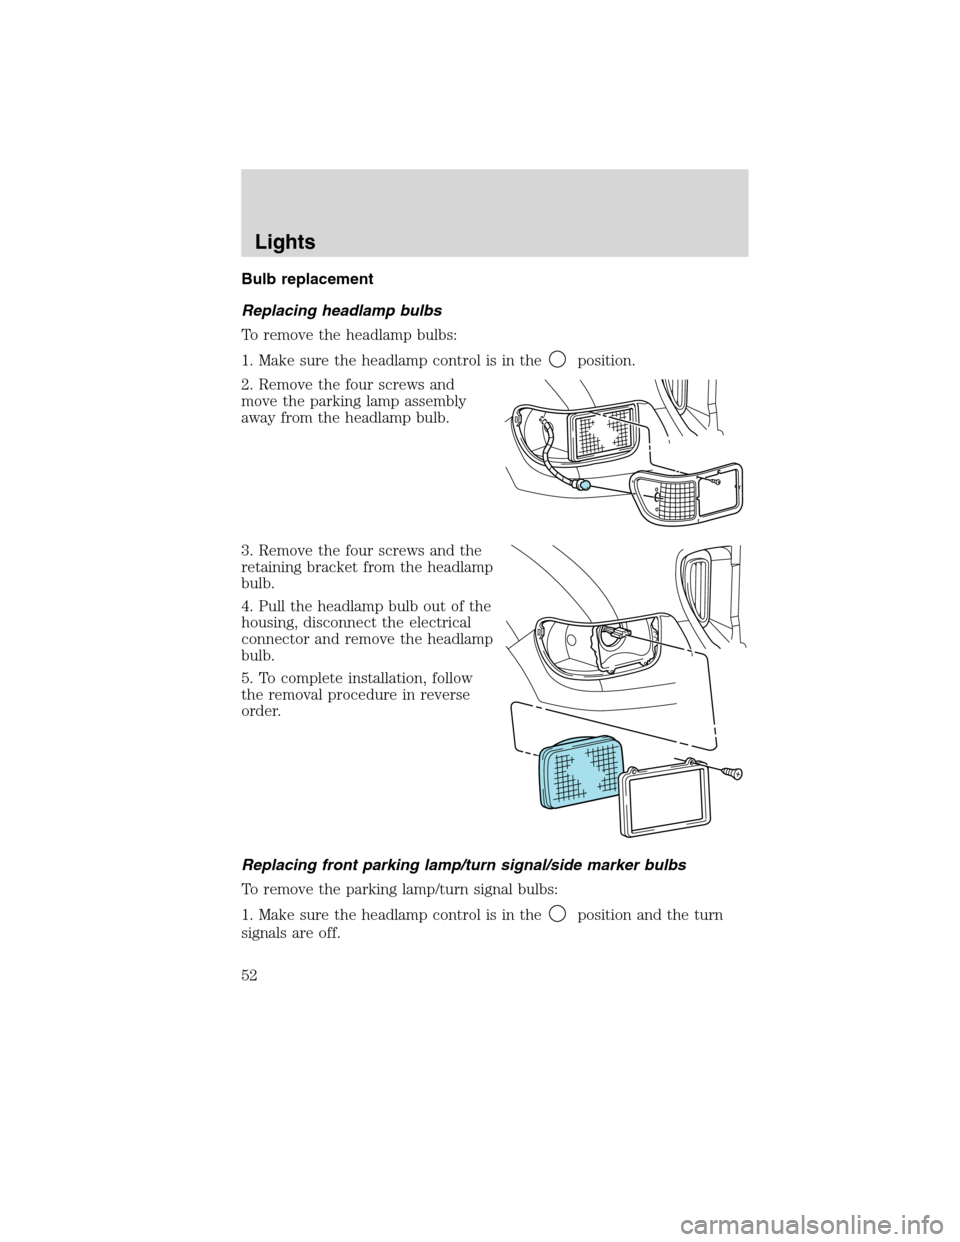 FORD F750 2010 12.G Owners Manual Bulb replacement
Replacing headlamp bulbs
To remove the headlamp bulbs:
1. Make sure the headlamp control is in the
position.
2. Remove the four screws and
move the parking lamp assembly
away from the